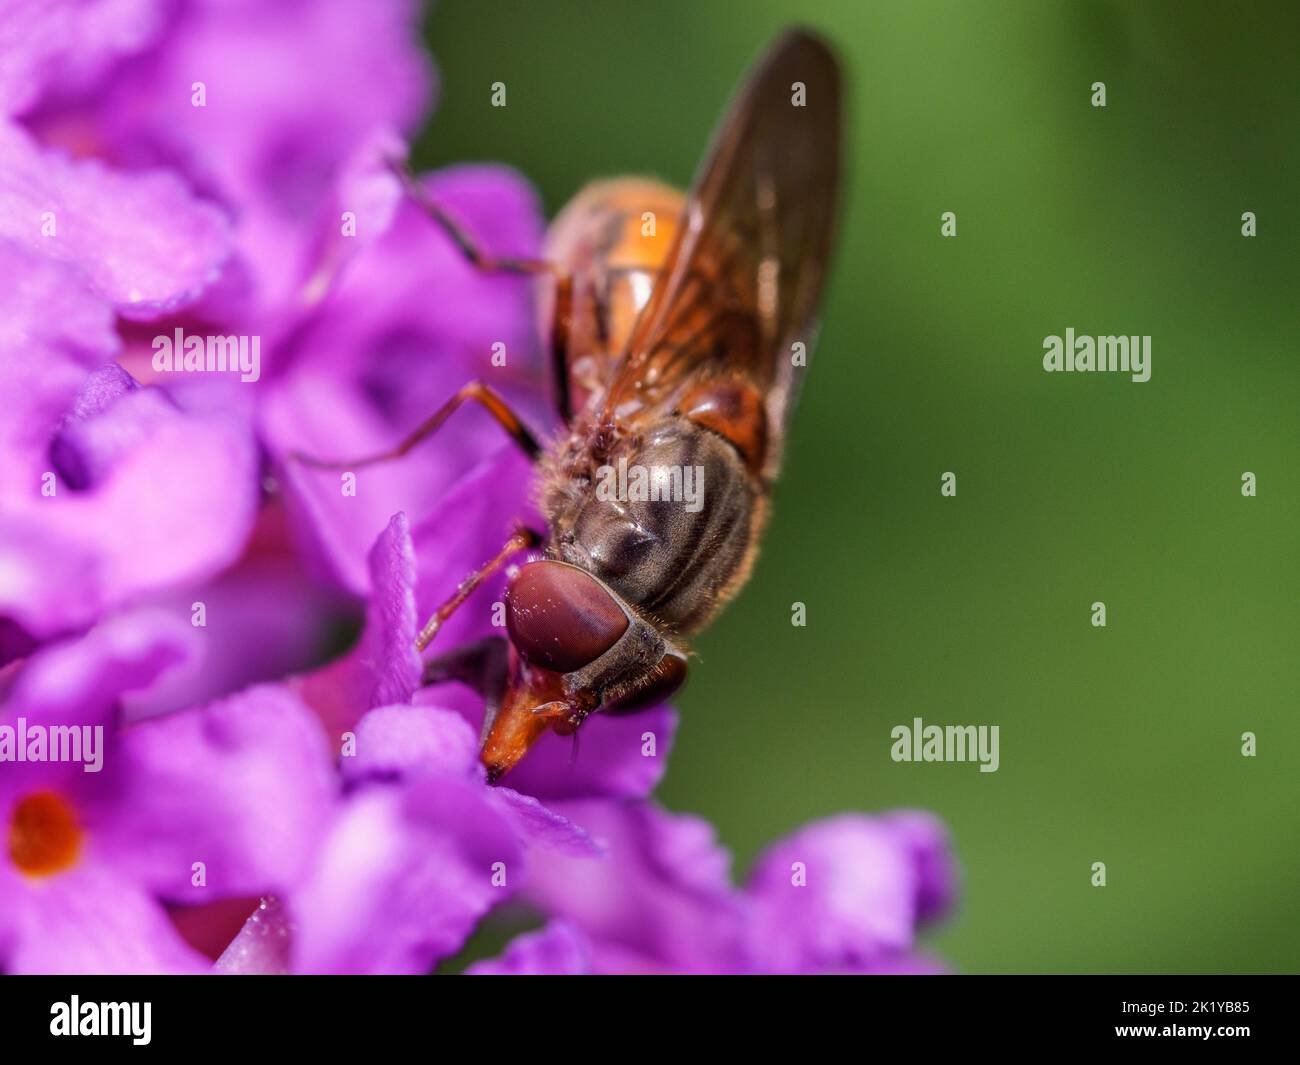 Female Rhingia campestris hoverfly on a buddleia flower against a clean green bachground with space for copy Stock Photo